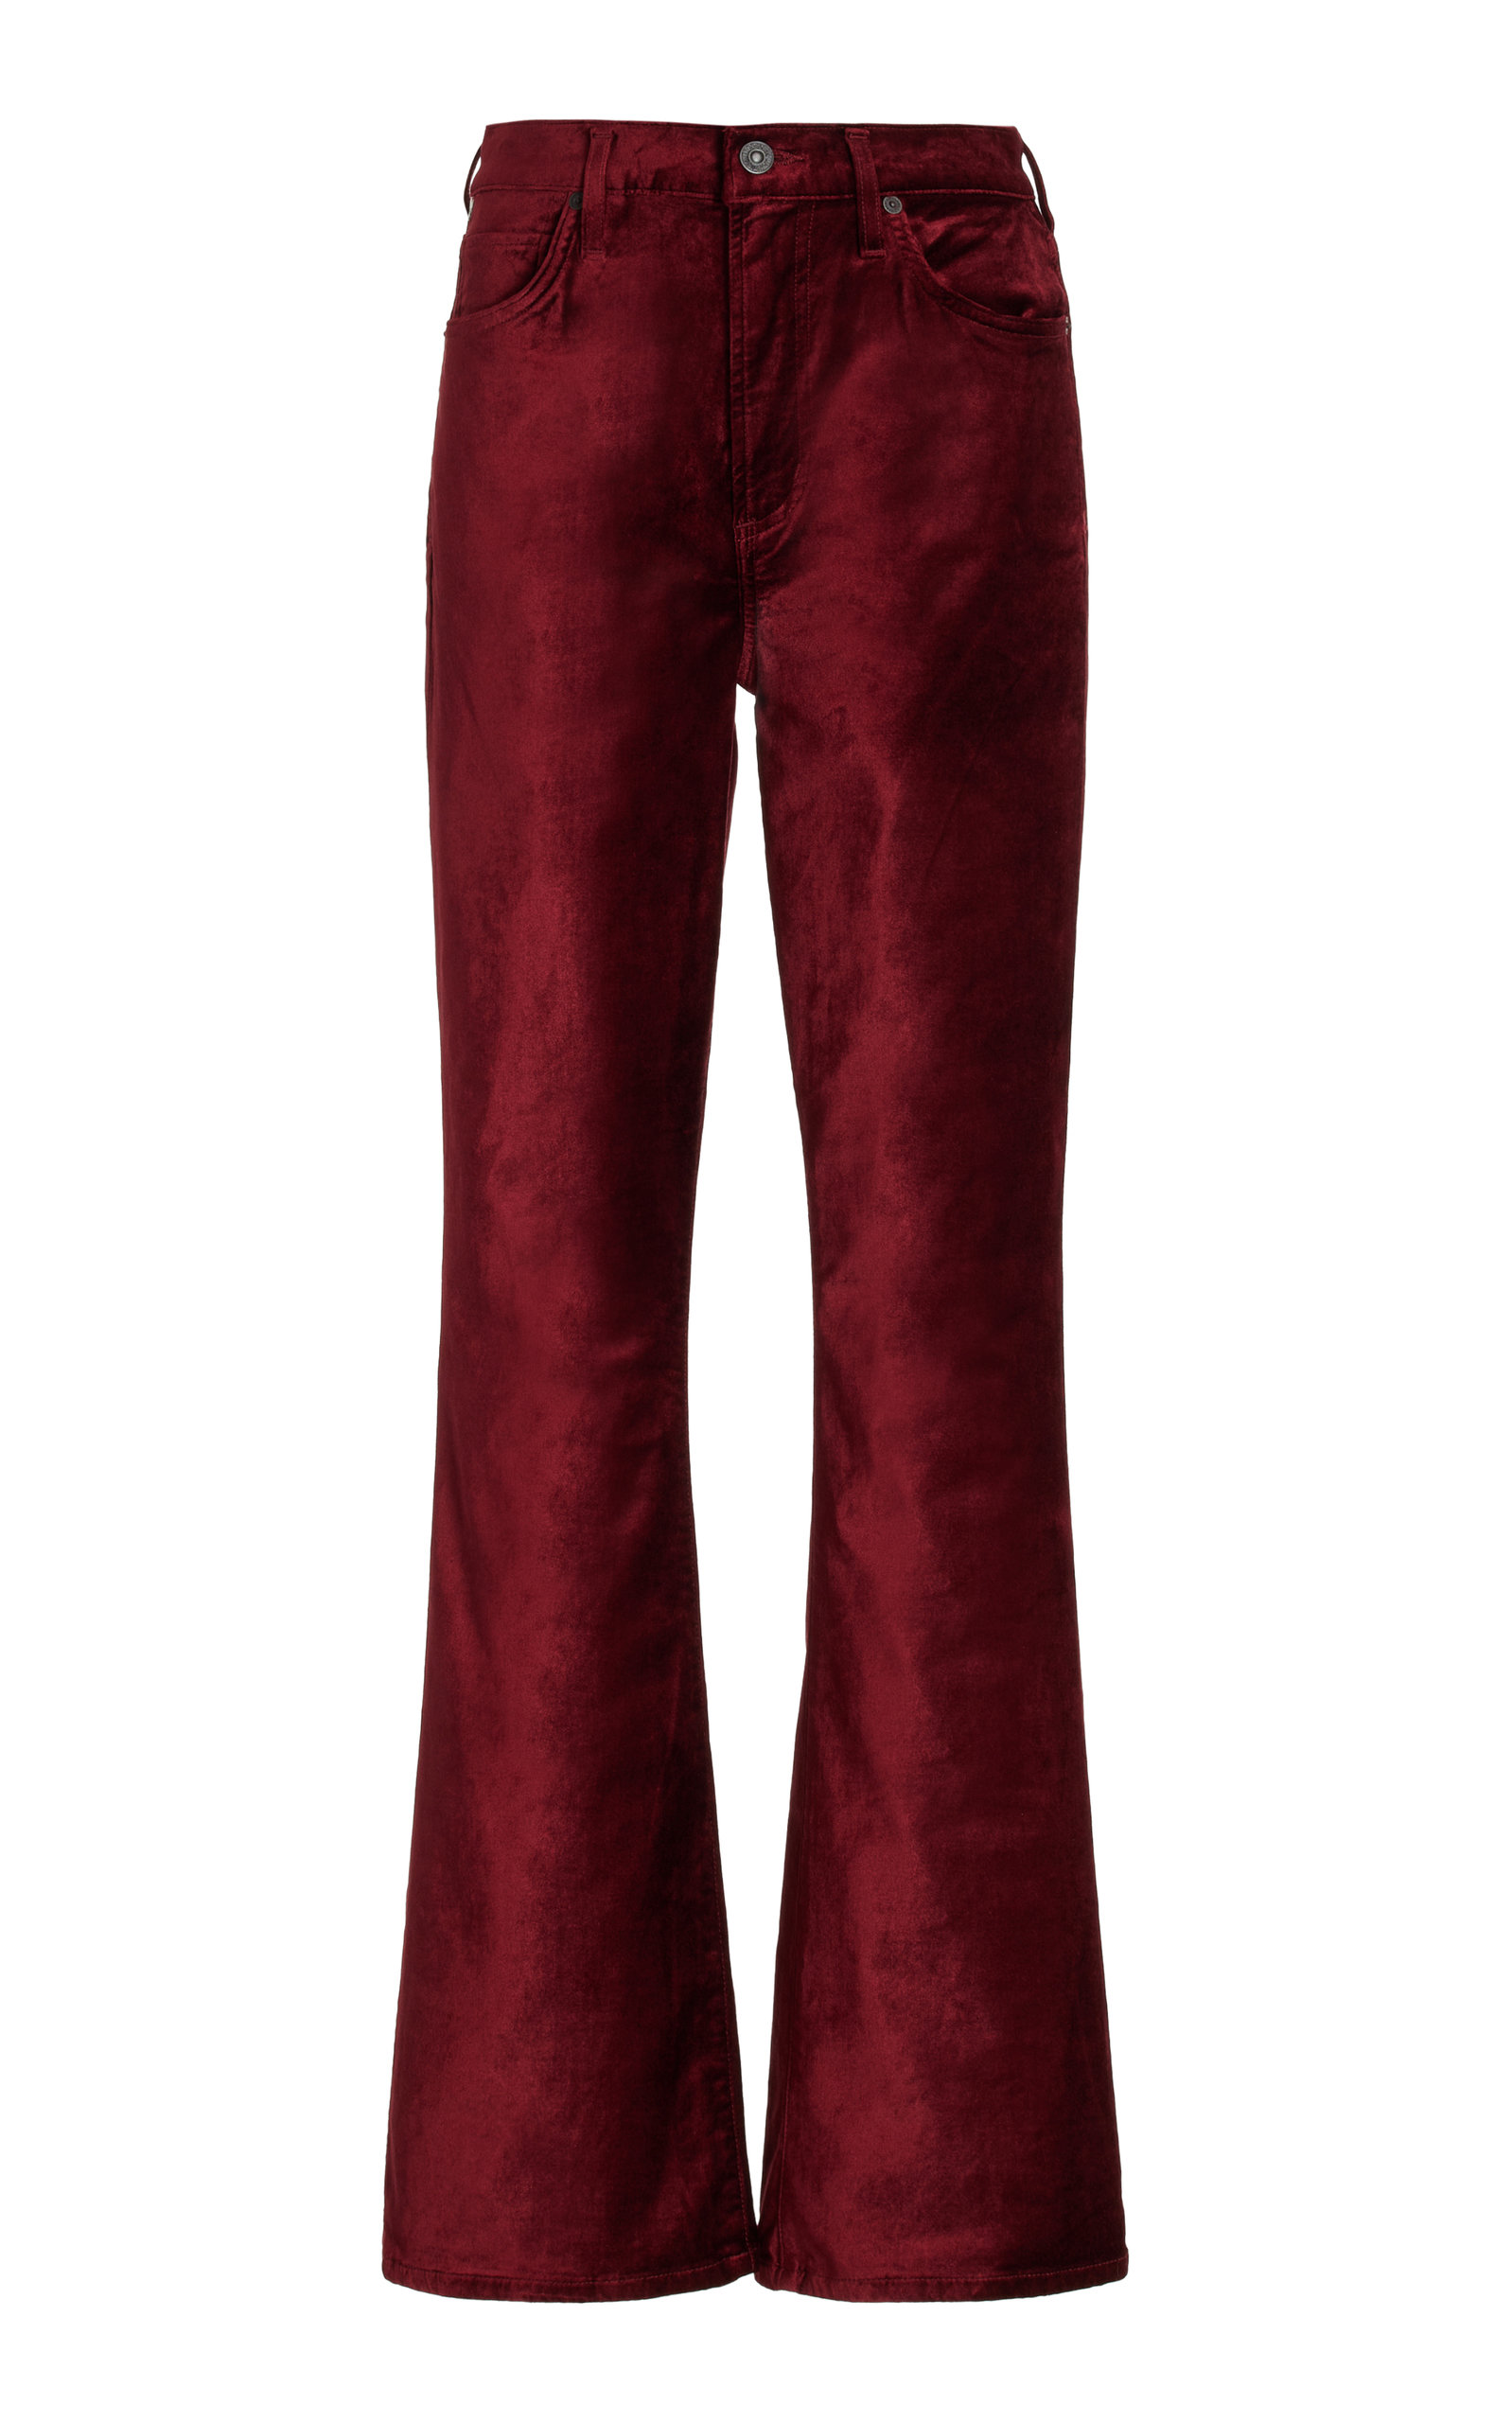 CITIZENS OF HUMANITY LILAH VELVET HIGH-RISE BOOTCUT JEANS